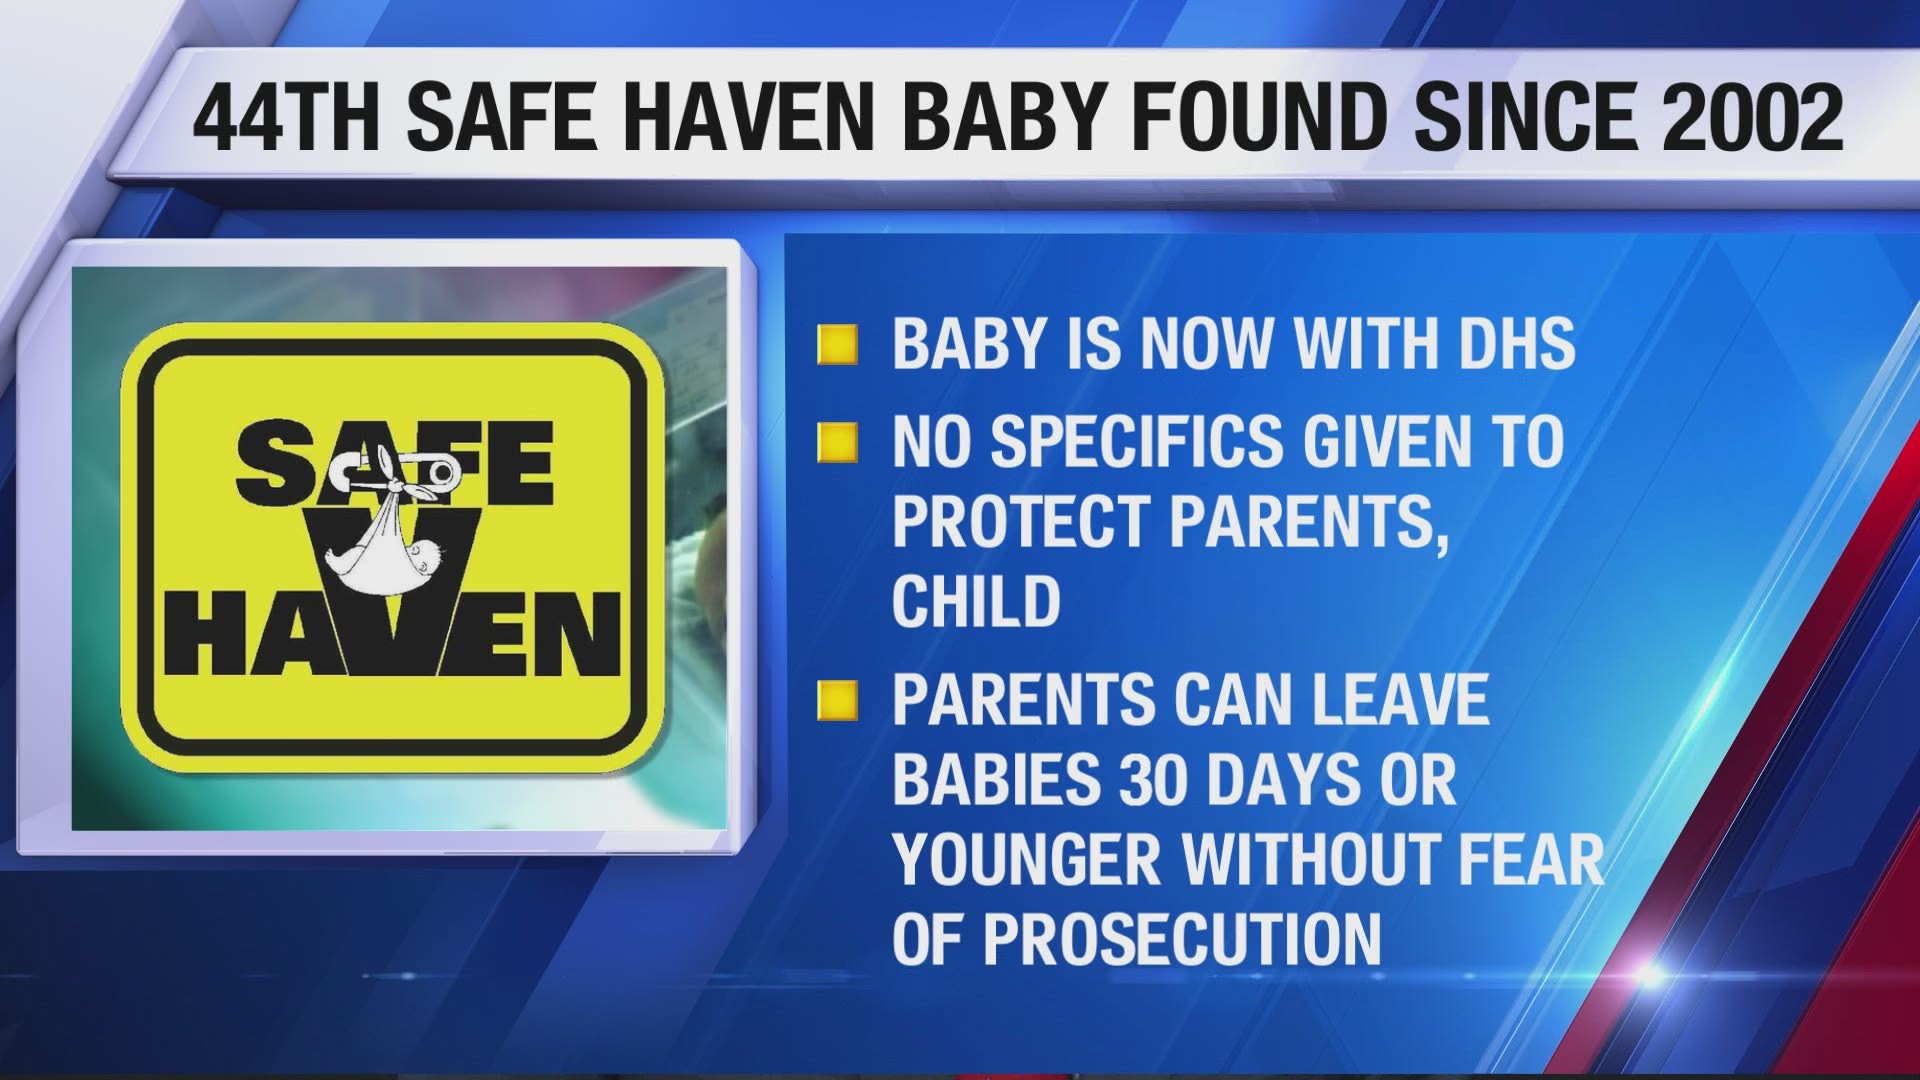 Through the state's Safe Haven law, infants age 30 days or younger can be left at a health care facility "without fear of prosecution or abandonment."